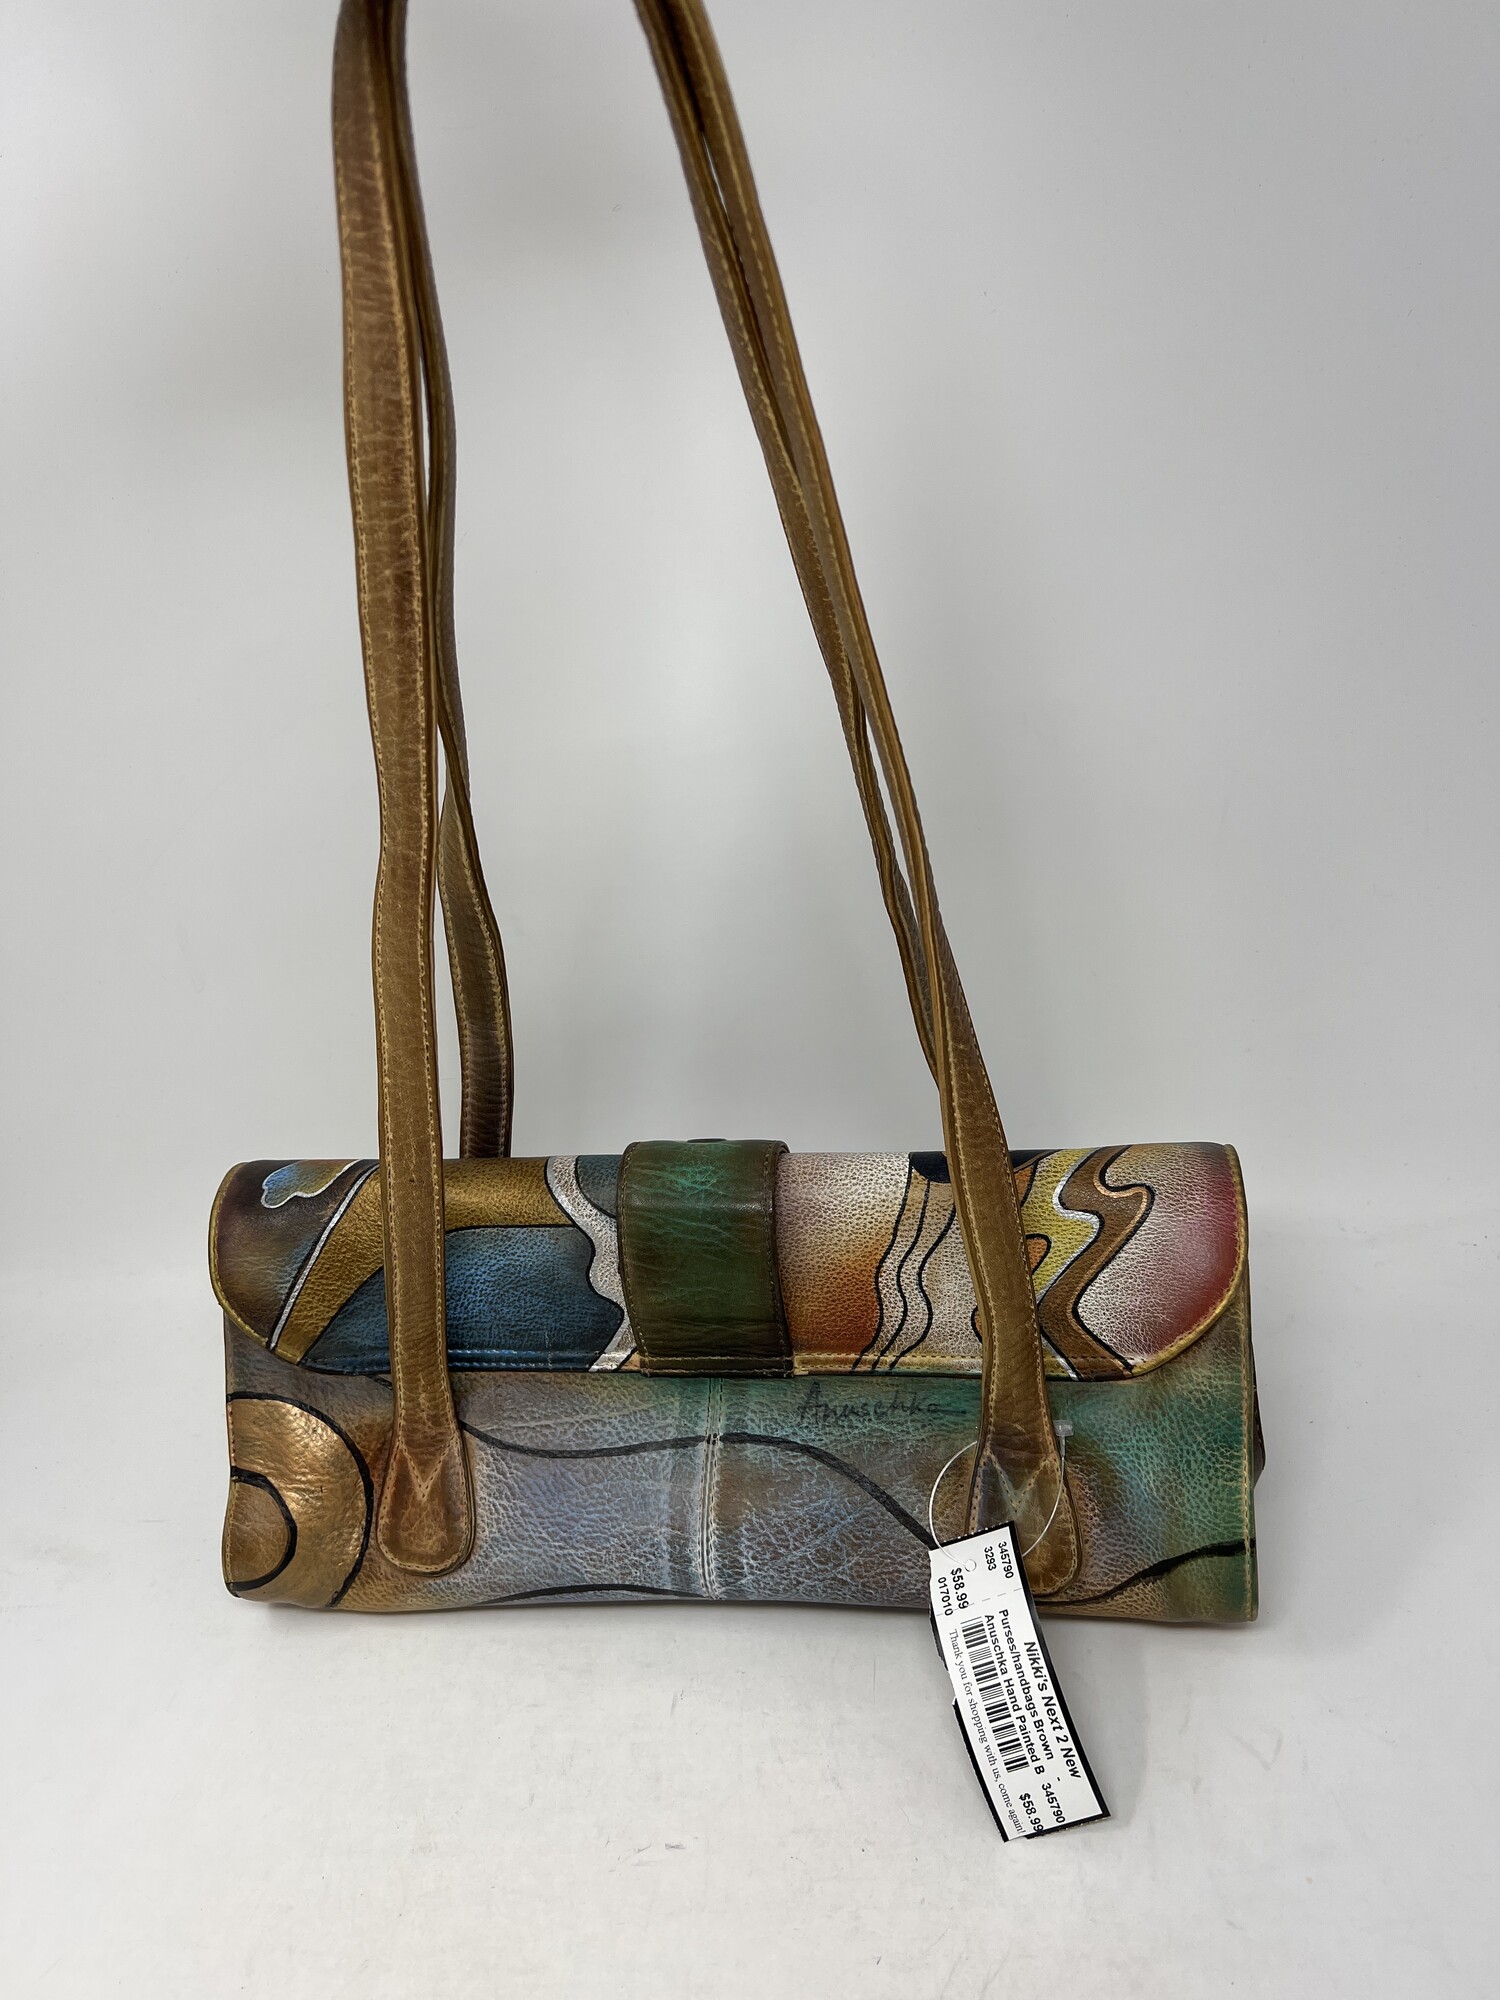 Hand-Painted Purses, Wallets and All | Great Day SA | kens5.com